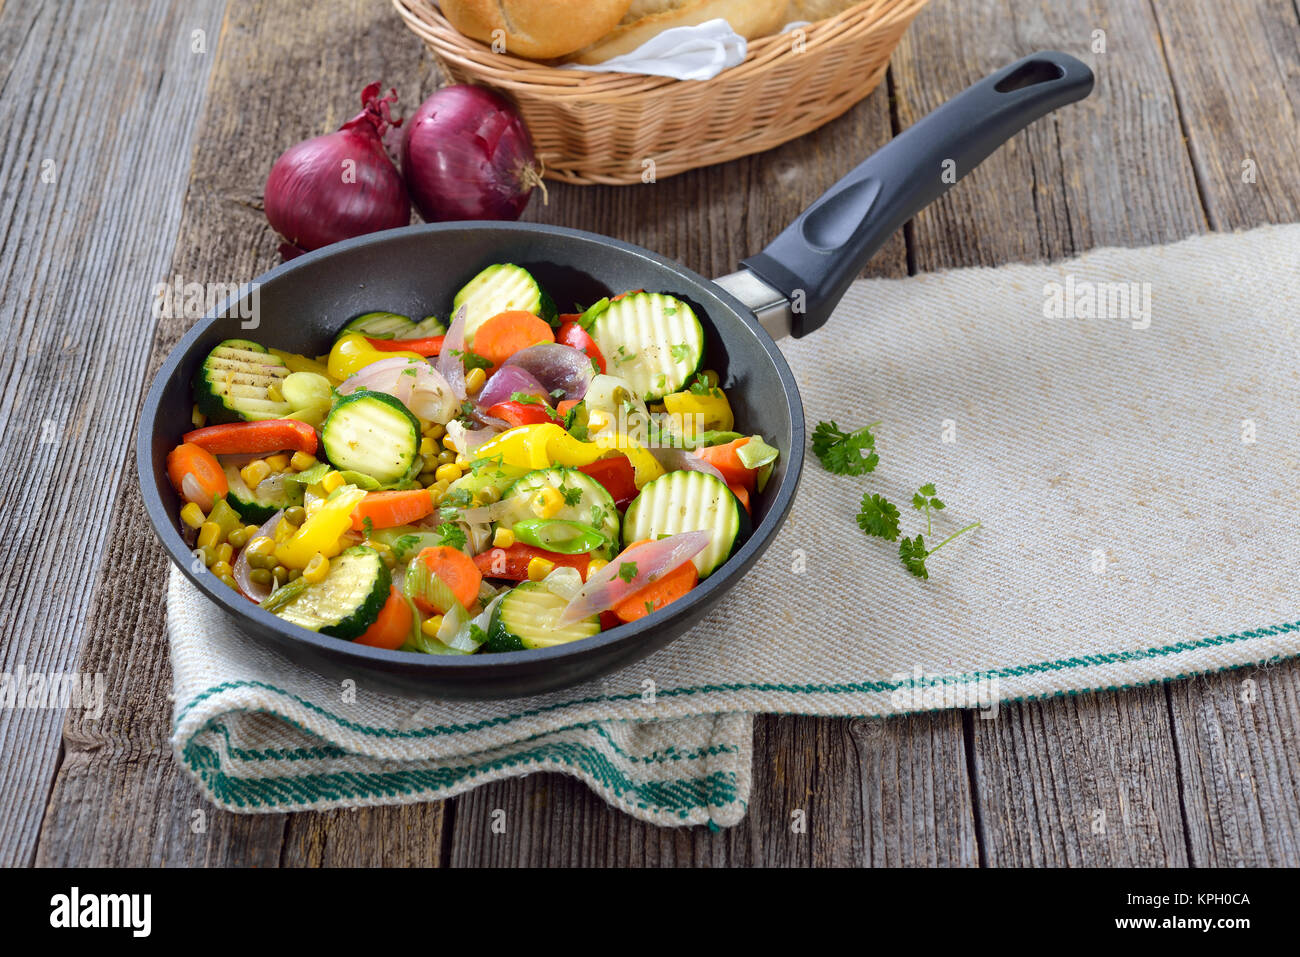 A vegan meal: Mixed short fried vegetables served in a pan Stock Photo